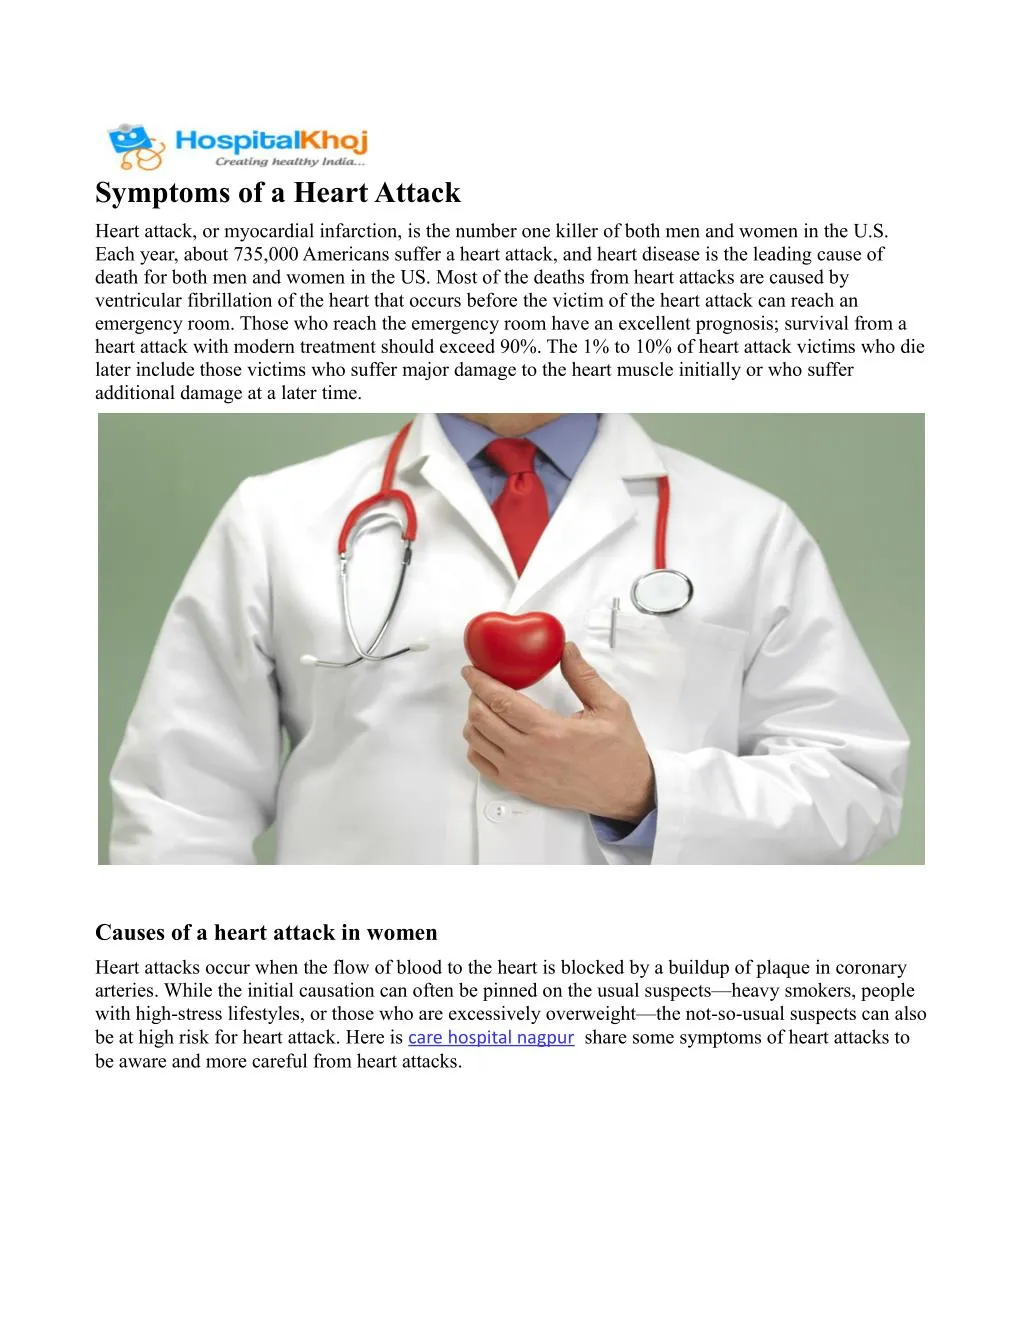 PPT Symptoms of a heart attack PowerPoint Presentation, free download